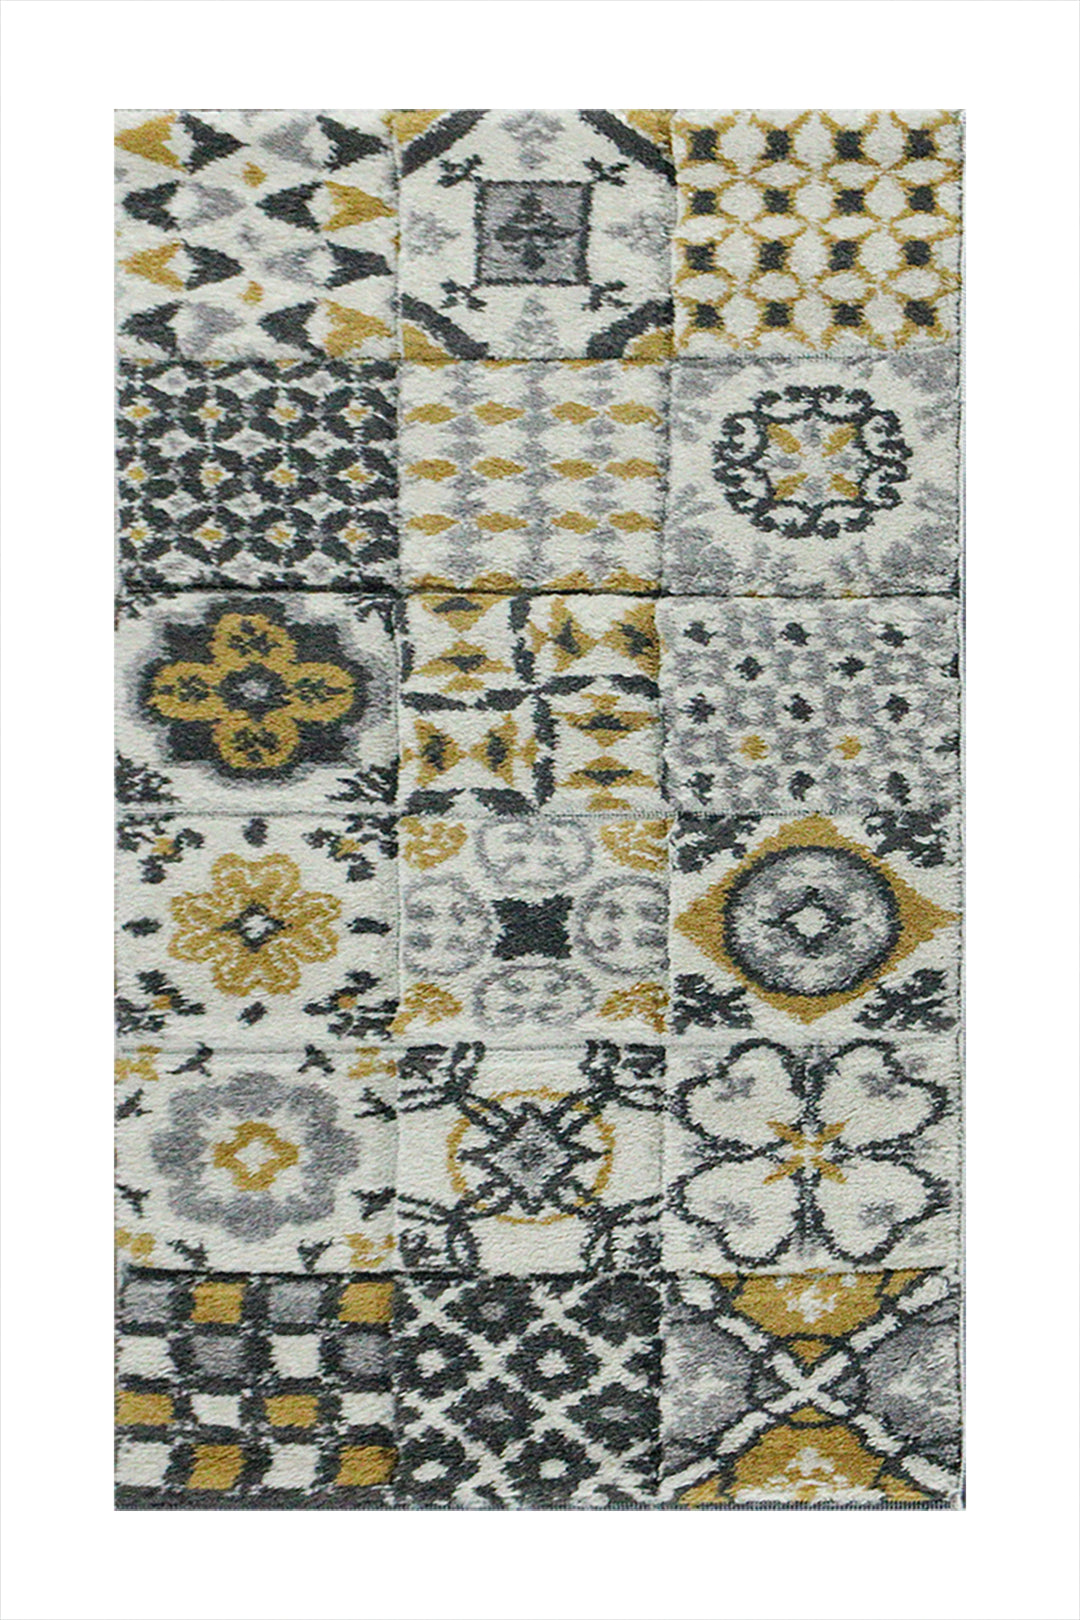 Turkish Modern Festival WD Rug - 2.0 x 3.8 FT - Cream and Yellow - Sleek and Minimalist for Chic Interiors